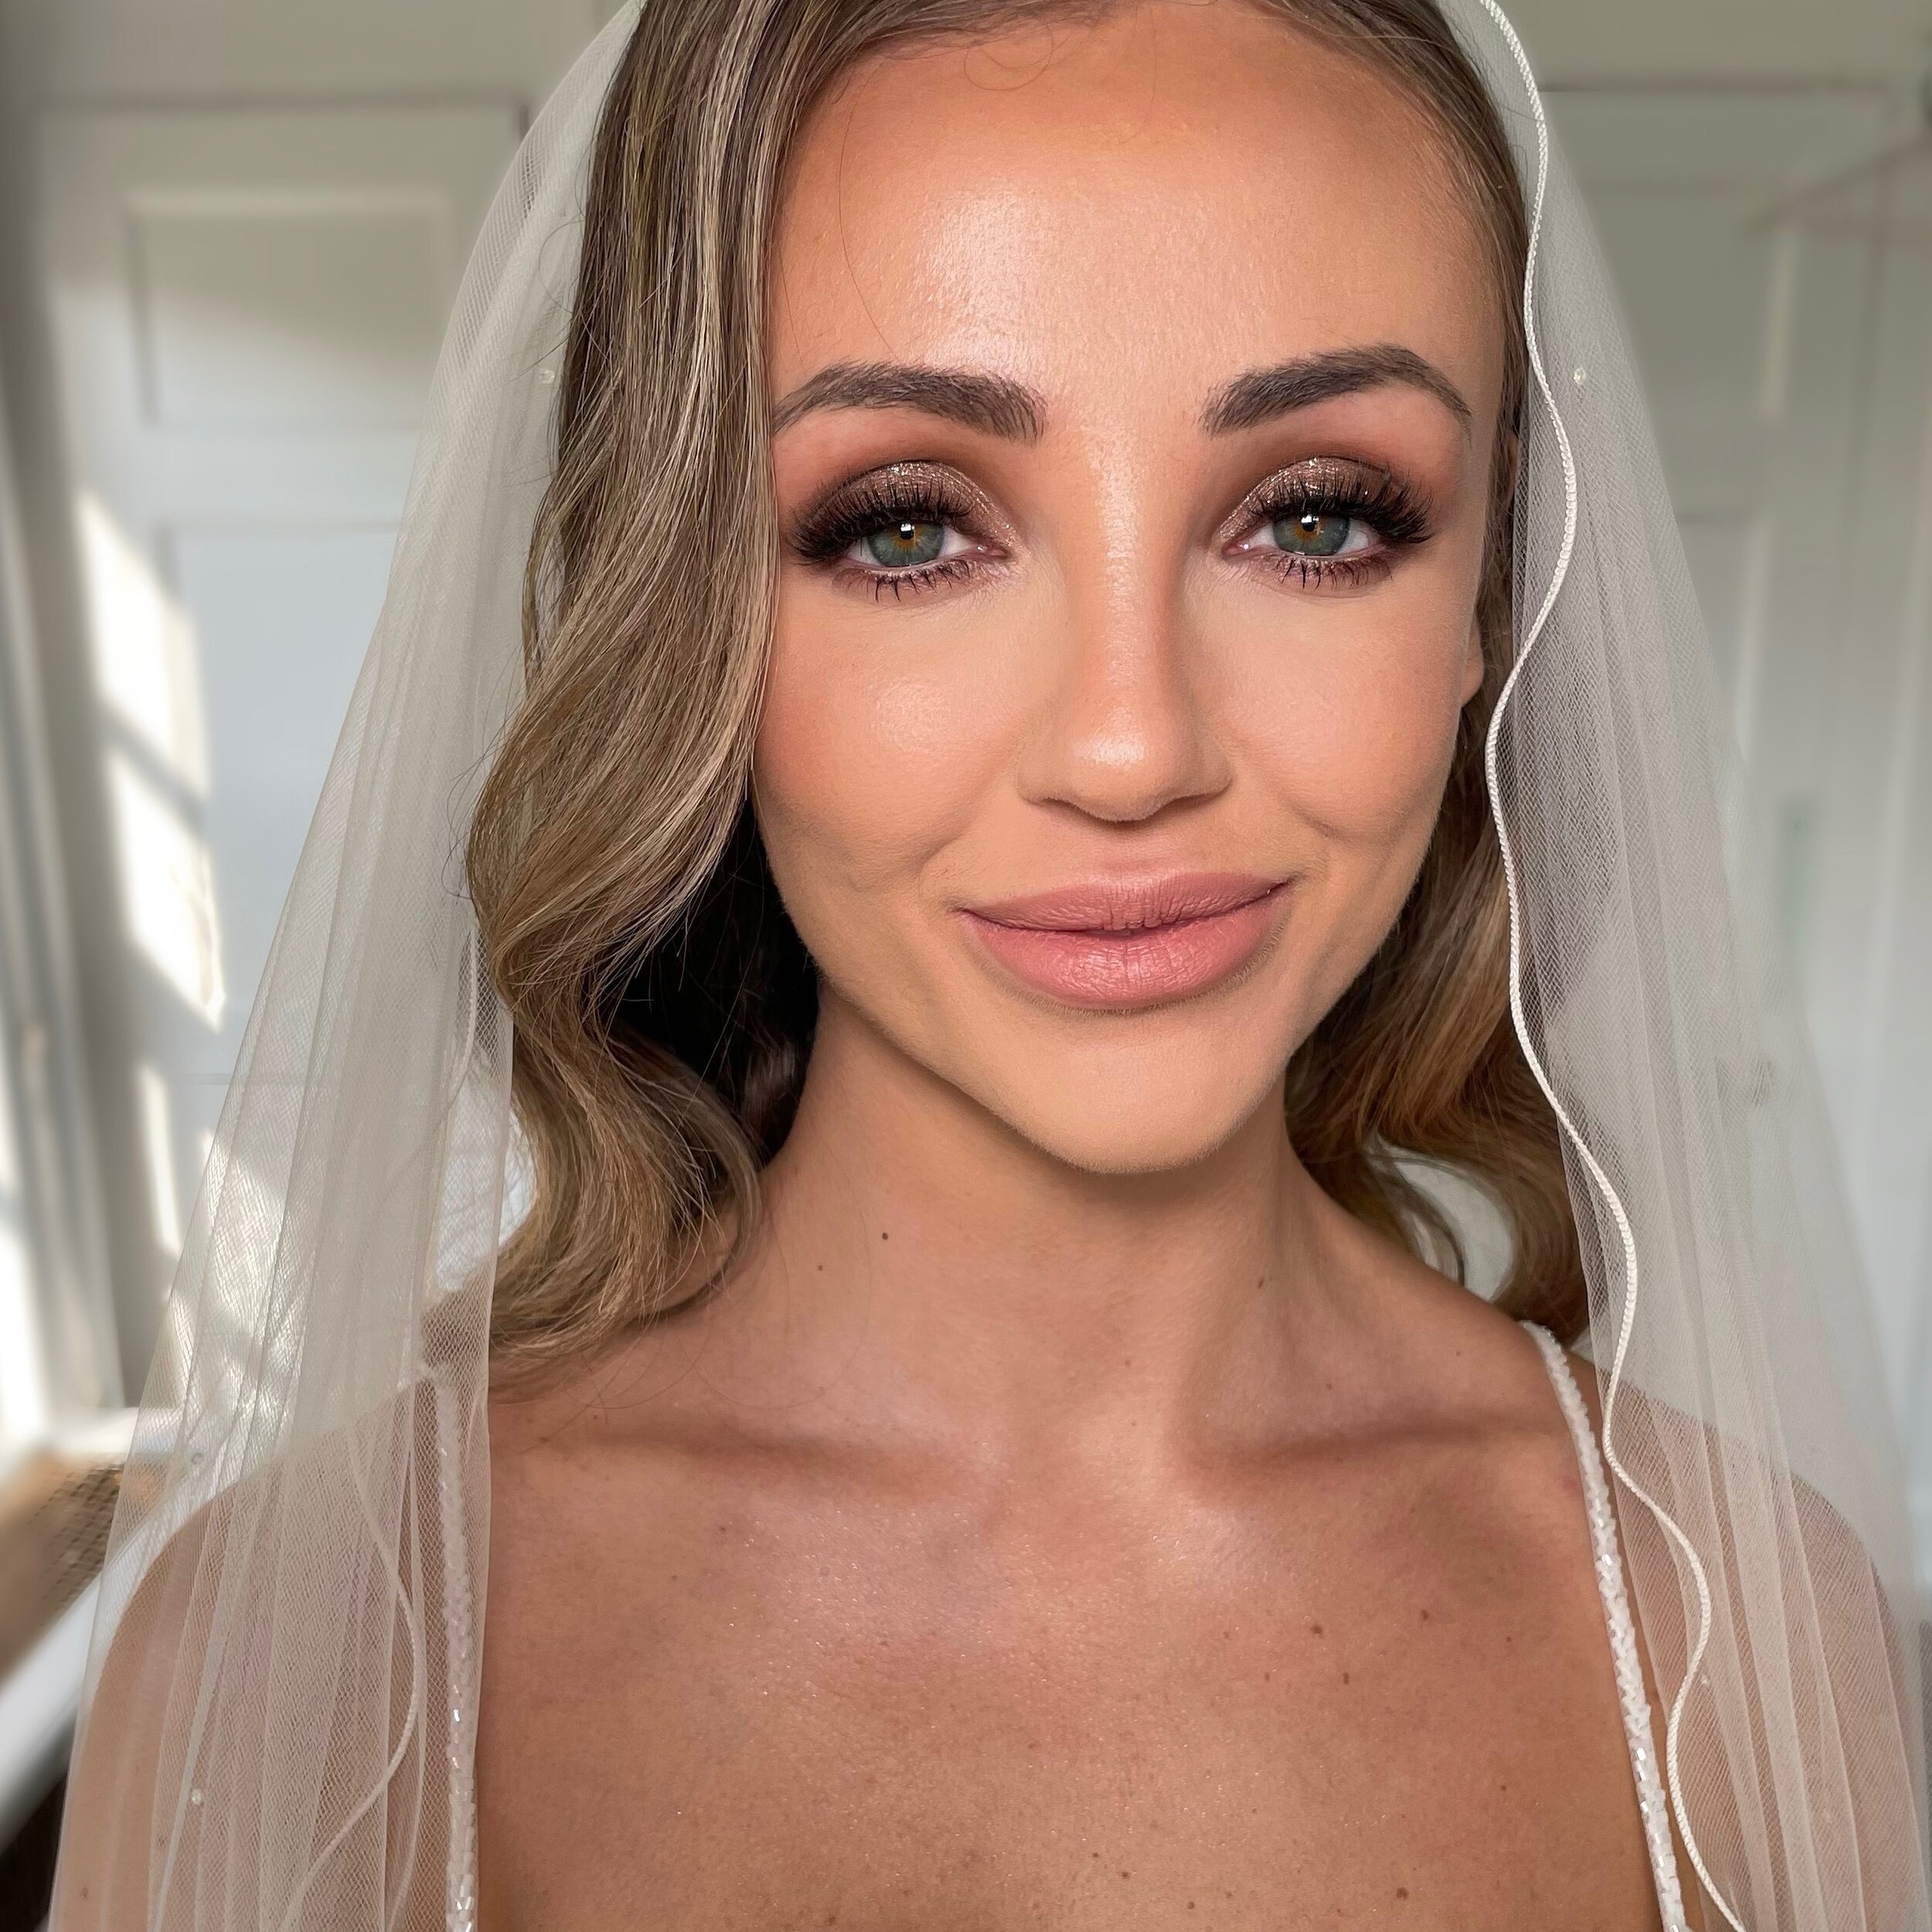 ✨ Fran ✨

Flawless bridal makeup - subtle smokey eyes and sun kissed skin 💋

Hollywood waves by @sophiefrank_undertheveil 
Dress and veil by @tillymintwedding 

* 100% REAL SKIN - no edits, no filters! *

#makeupartist #mua #makeupartisthampshire #m